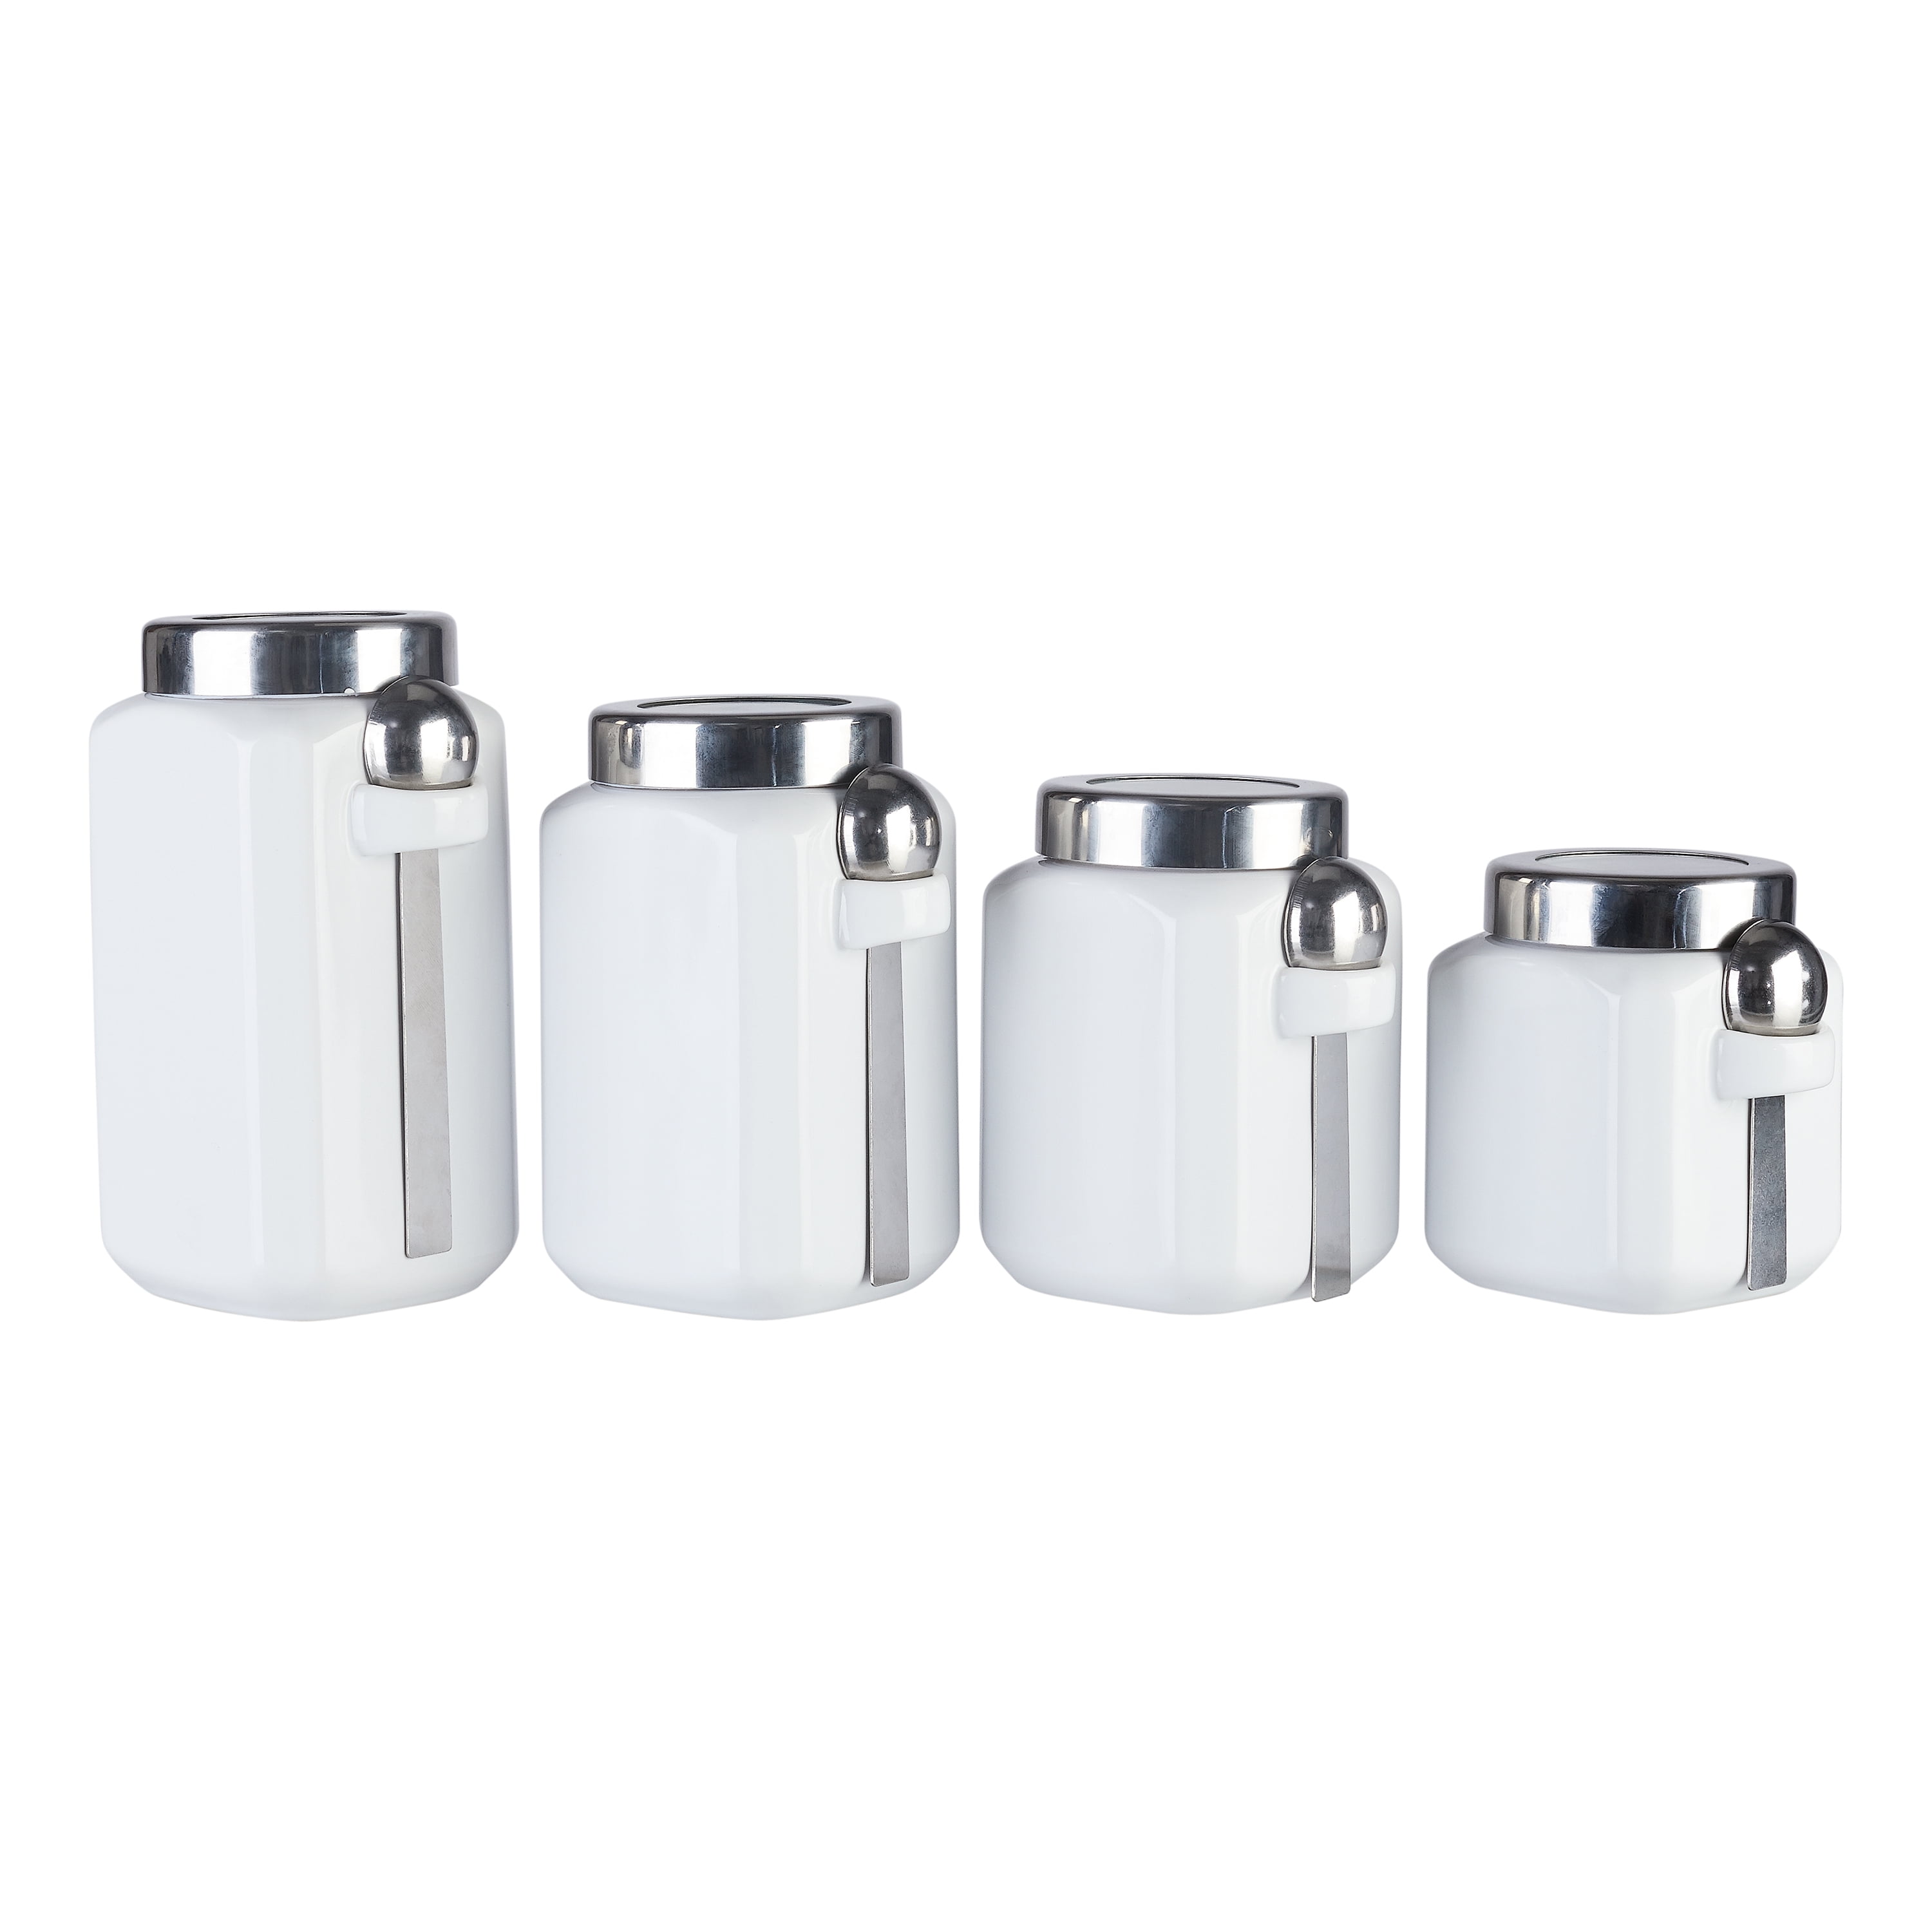 Oggi Acrylic Canister Set with Spoons (4 Pieces) - Walmart.com